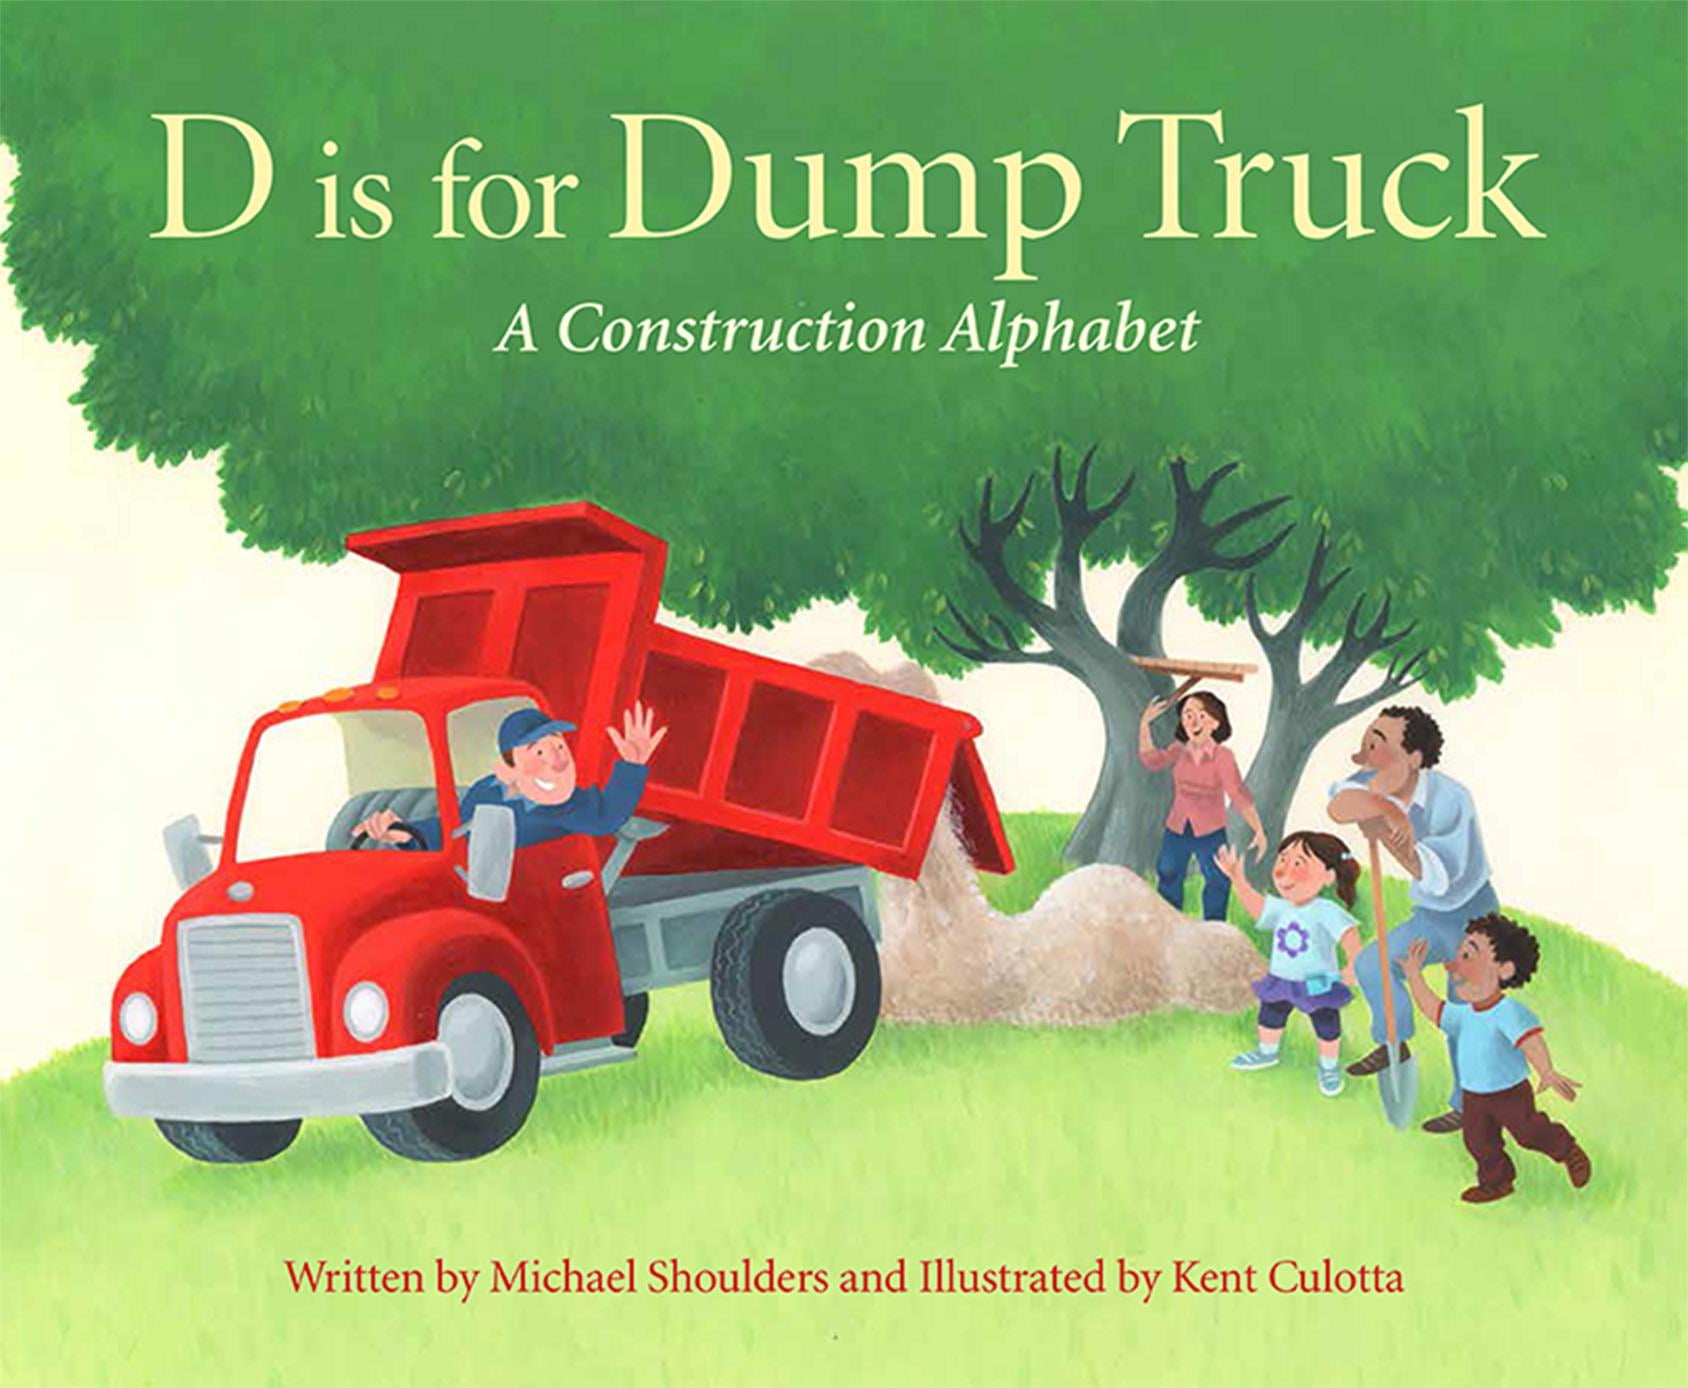 Dump Truck Songs For Preschoolers : Learn Vehicles For Kids Children Babies Toddlers With Dump Truck Tractor | Kids TV Preschool ... / Kolegend remote control dump truck construction vehicle toy rc truck for boys and girls gifts pack (black).